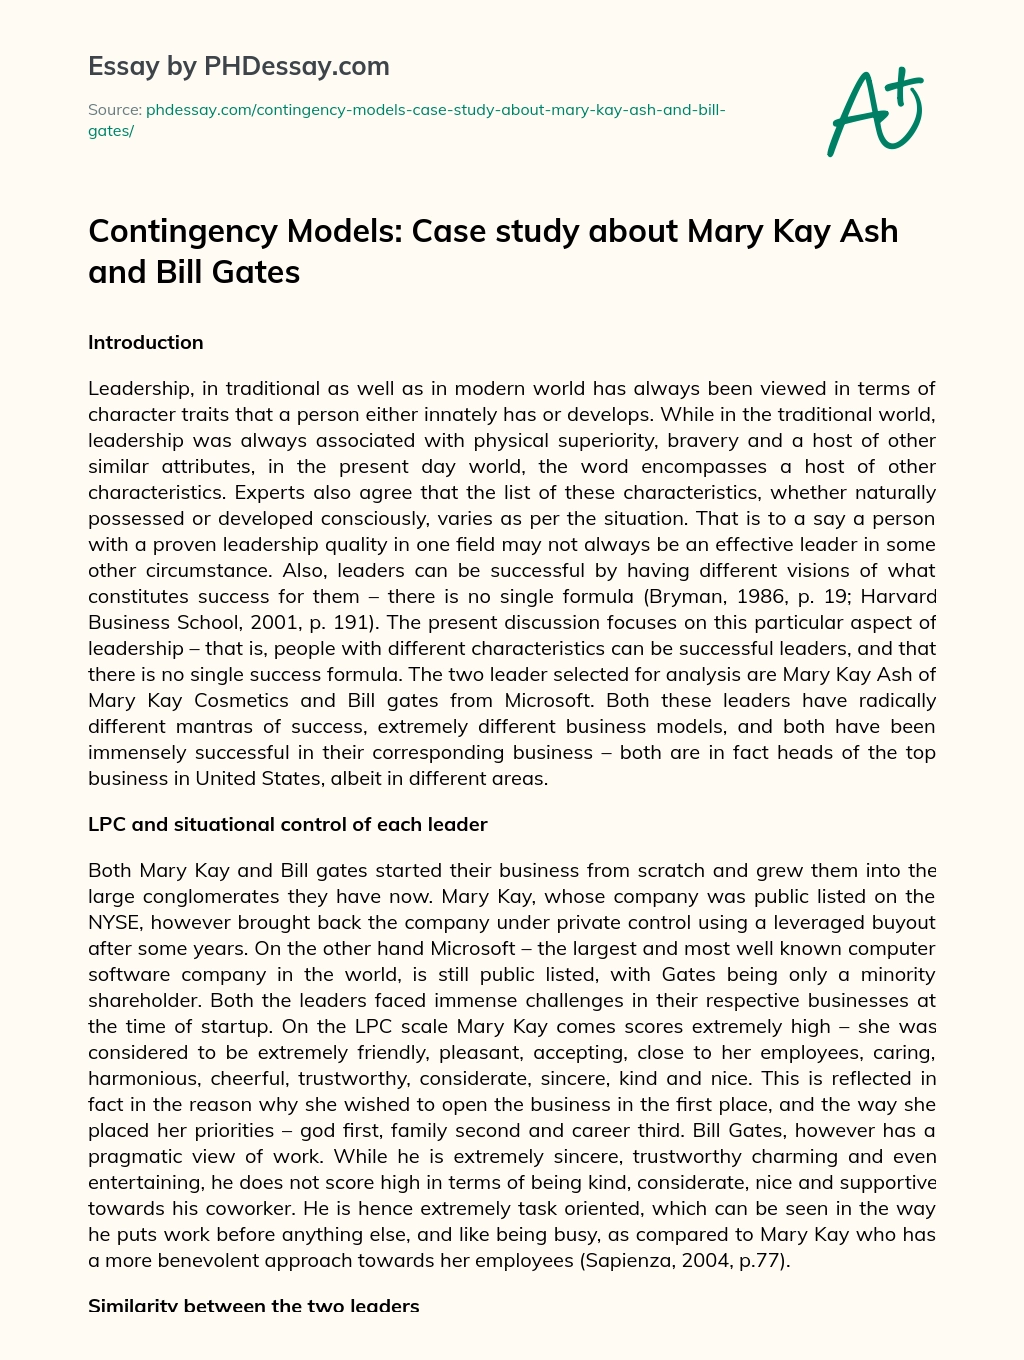 Contingency Models: Case study about Mary Kay Ash and Bill Gates essay